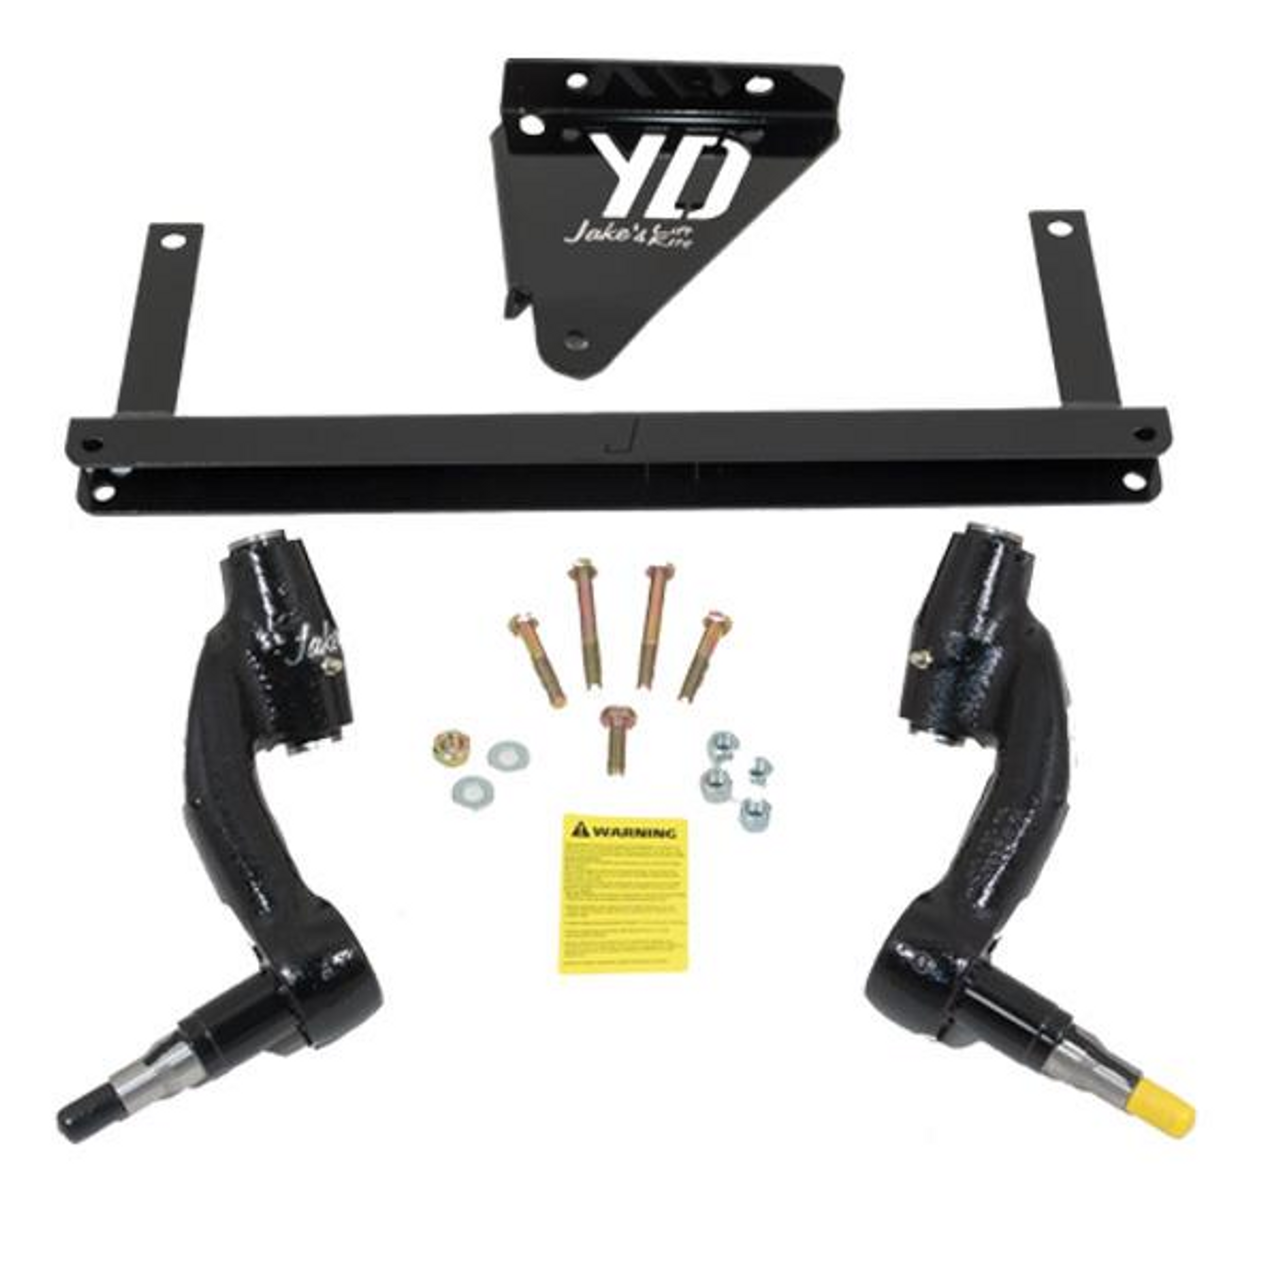 Jakes 3 Spindle Lift Kit for Yamaha Electric Drive2 Golf Cart (2017-Up)